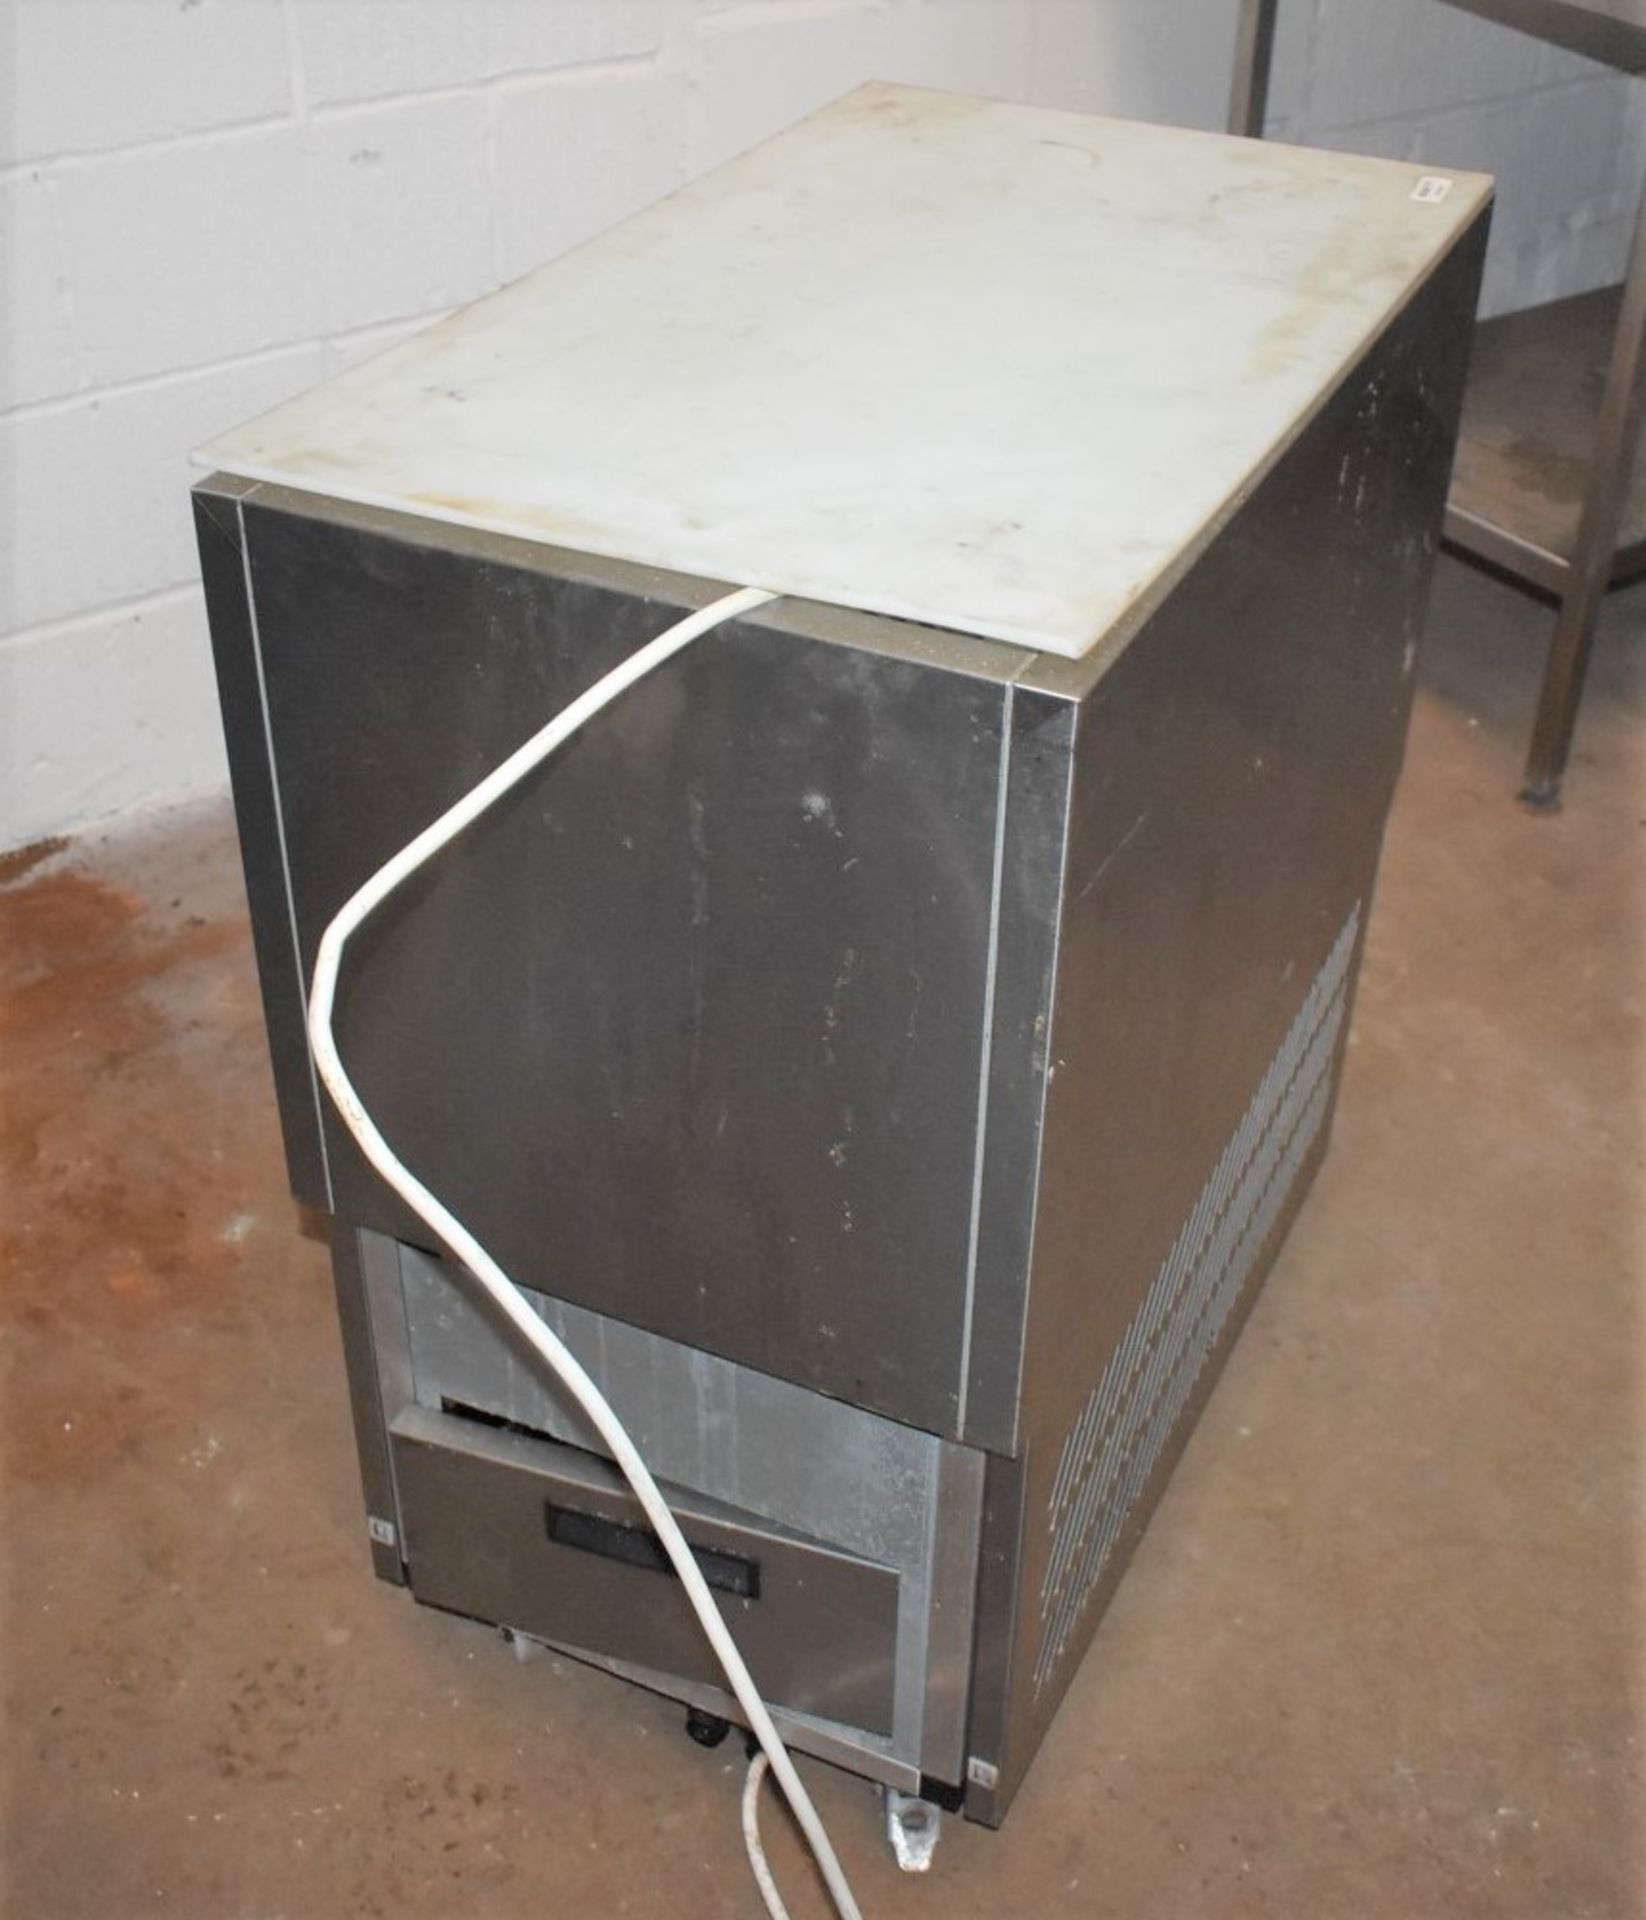 1 x Williams PW4 Refrigerated Prep Well With Prop Top Lid - CL011 - Ref CGA171 WH5 - 240v - - Image 5 of 10